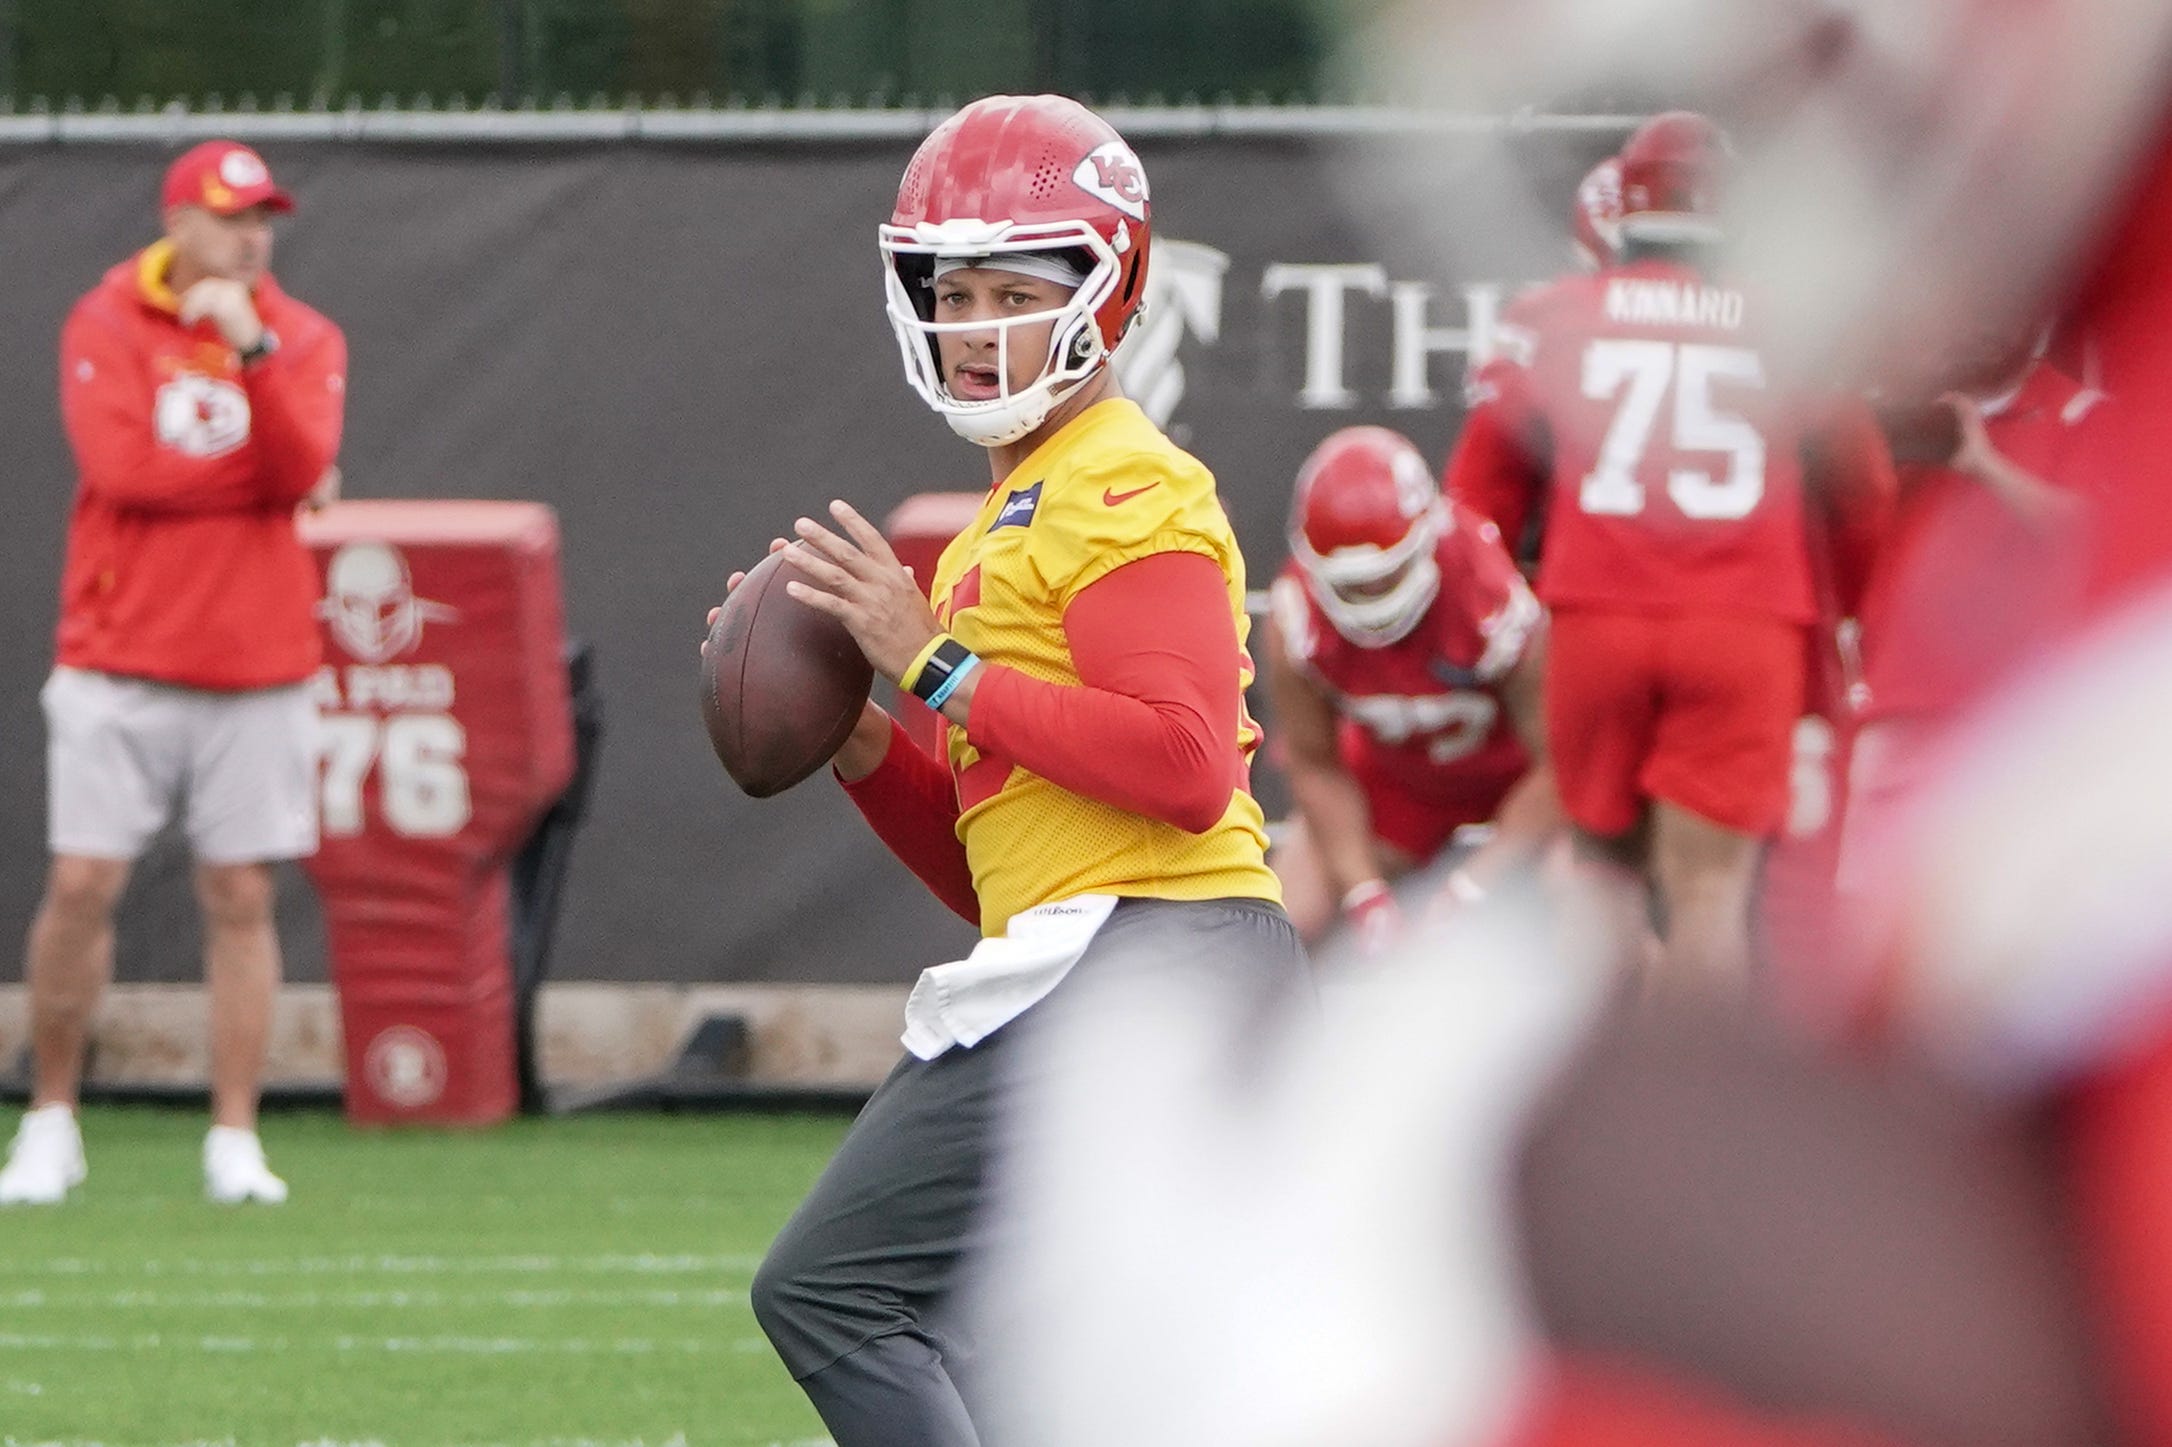 Kansas City Chiefs quarterback Patrick Mahomes drops back to pass during organized team activities at The University of Kansas Health System Training Complex on May 26.